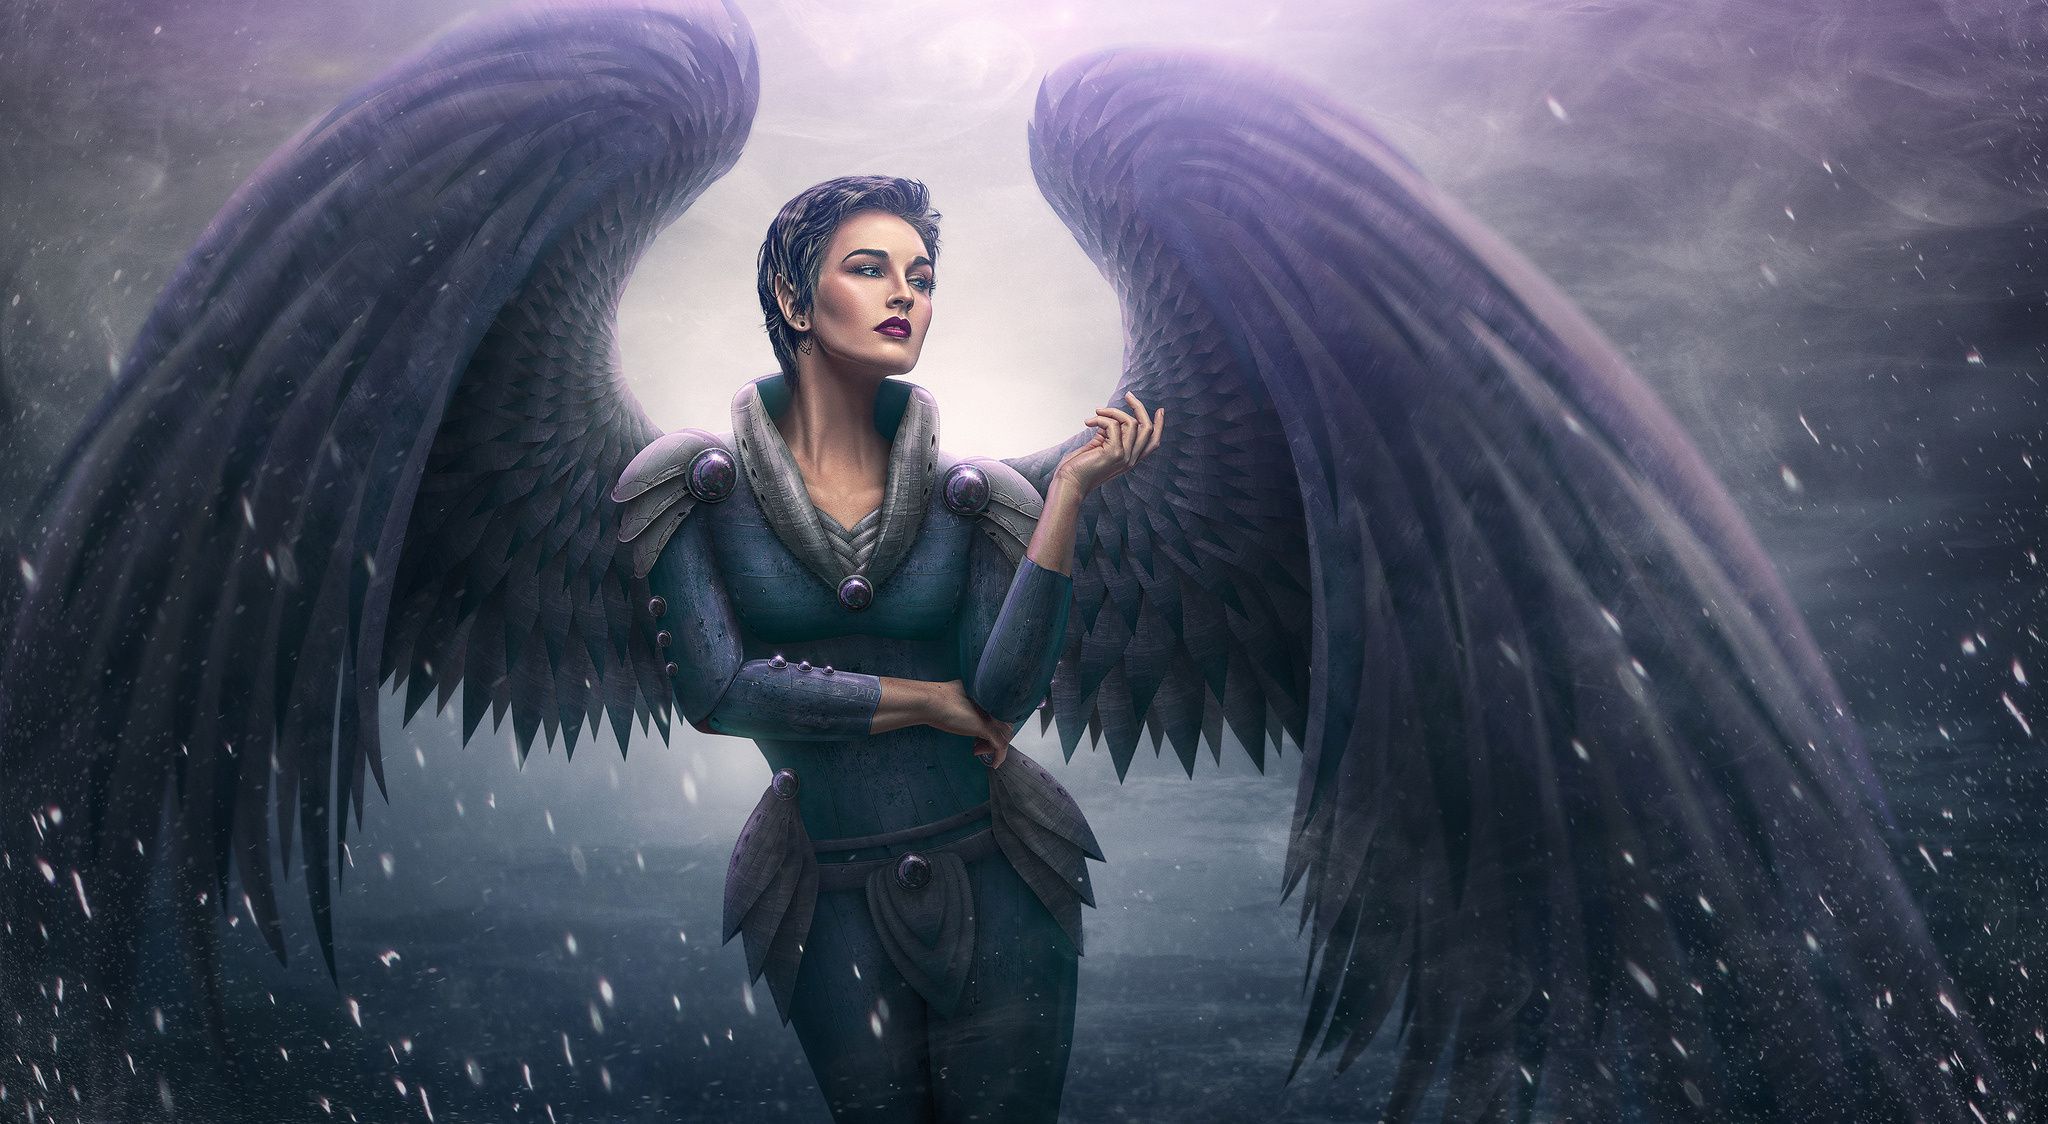 Wallpaper. Fantasy. photo. picture. the demon, wings, girl, background, art